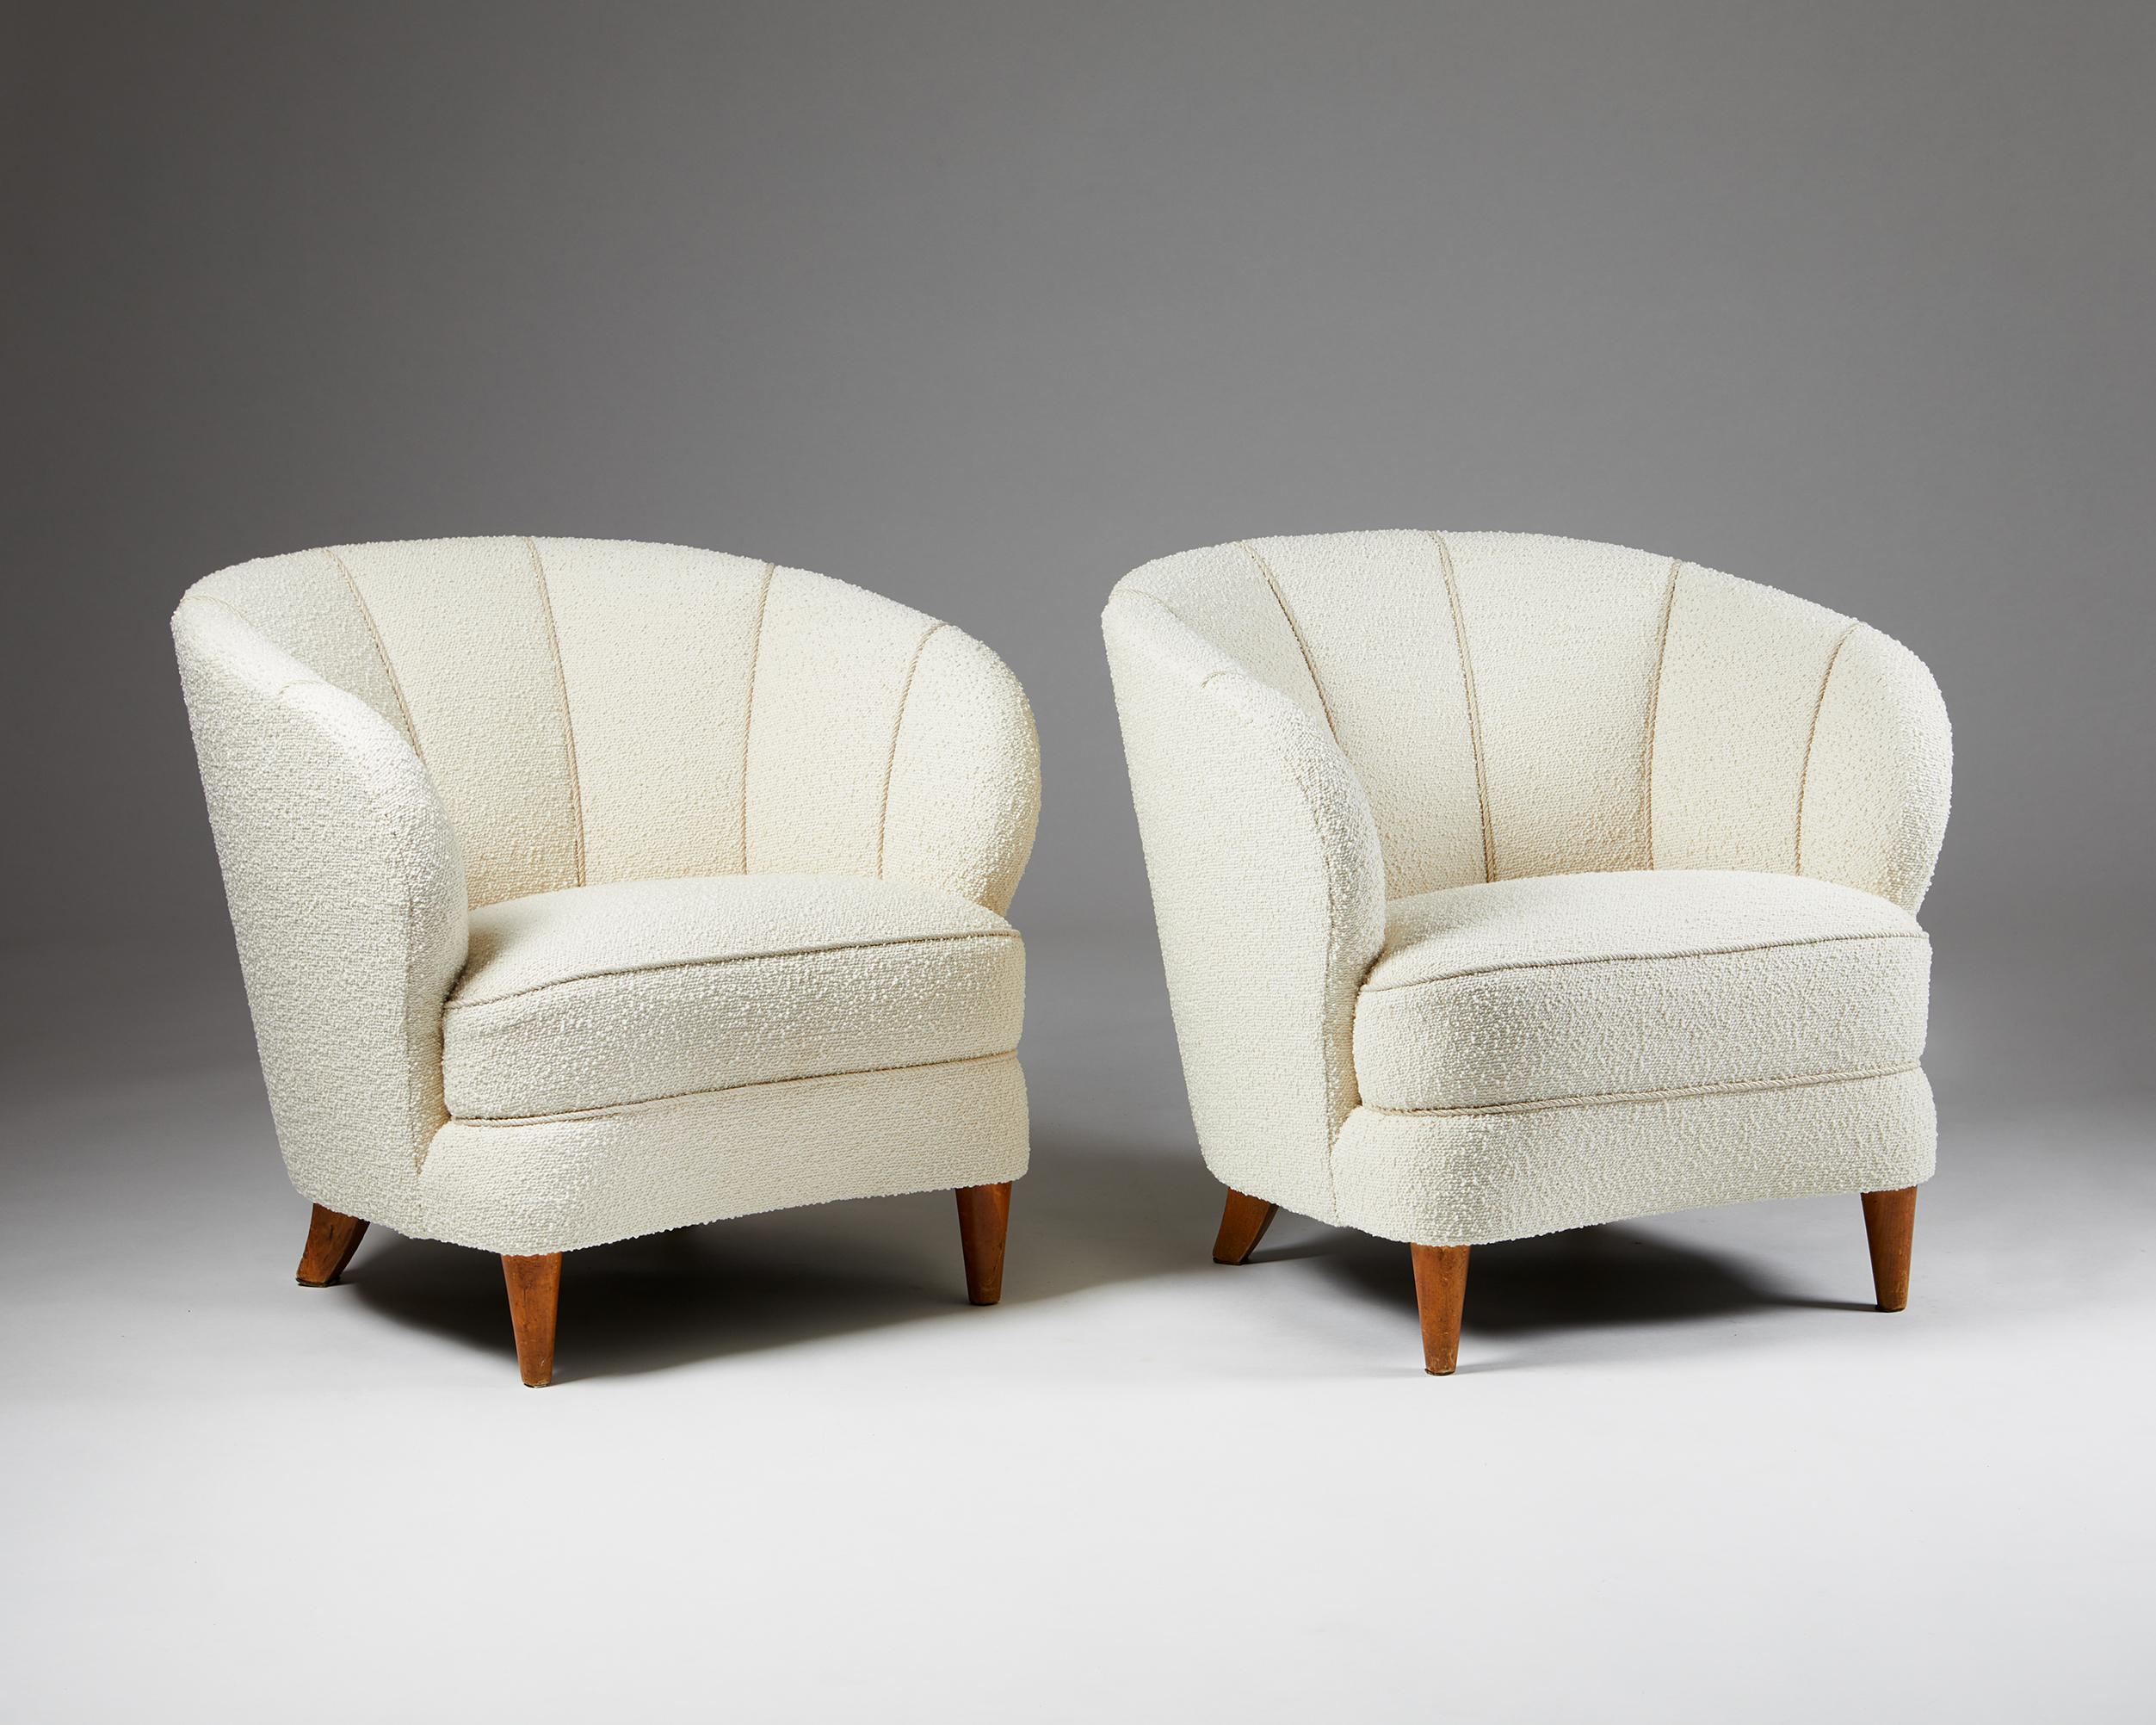 Pair of easy chairs attributed to Carl-Johan Boman,
Finland, 1950s.
Lacquered wood and reupholstery in Boucle fabric.

These exclusive and extremely comfortable chairs have generous armrests and curved, encompassing shell-shaped backs. They are